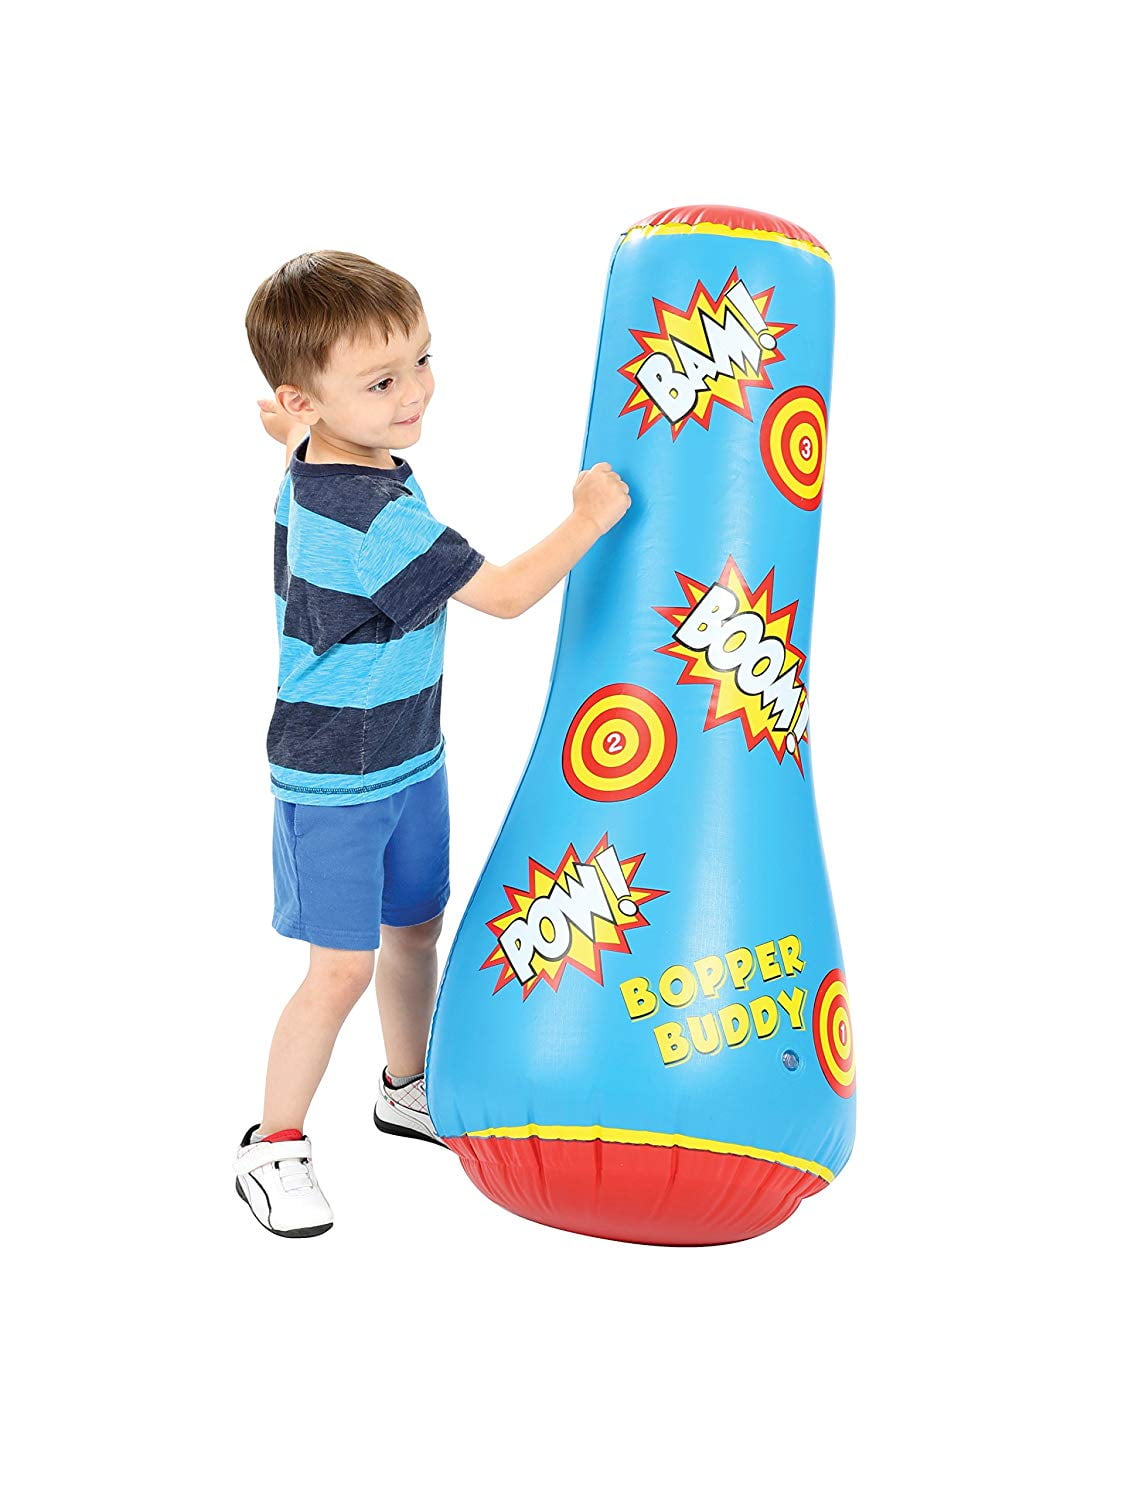 ETNA Products Inflatable Punching Bag for Kids, 12 Pack